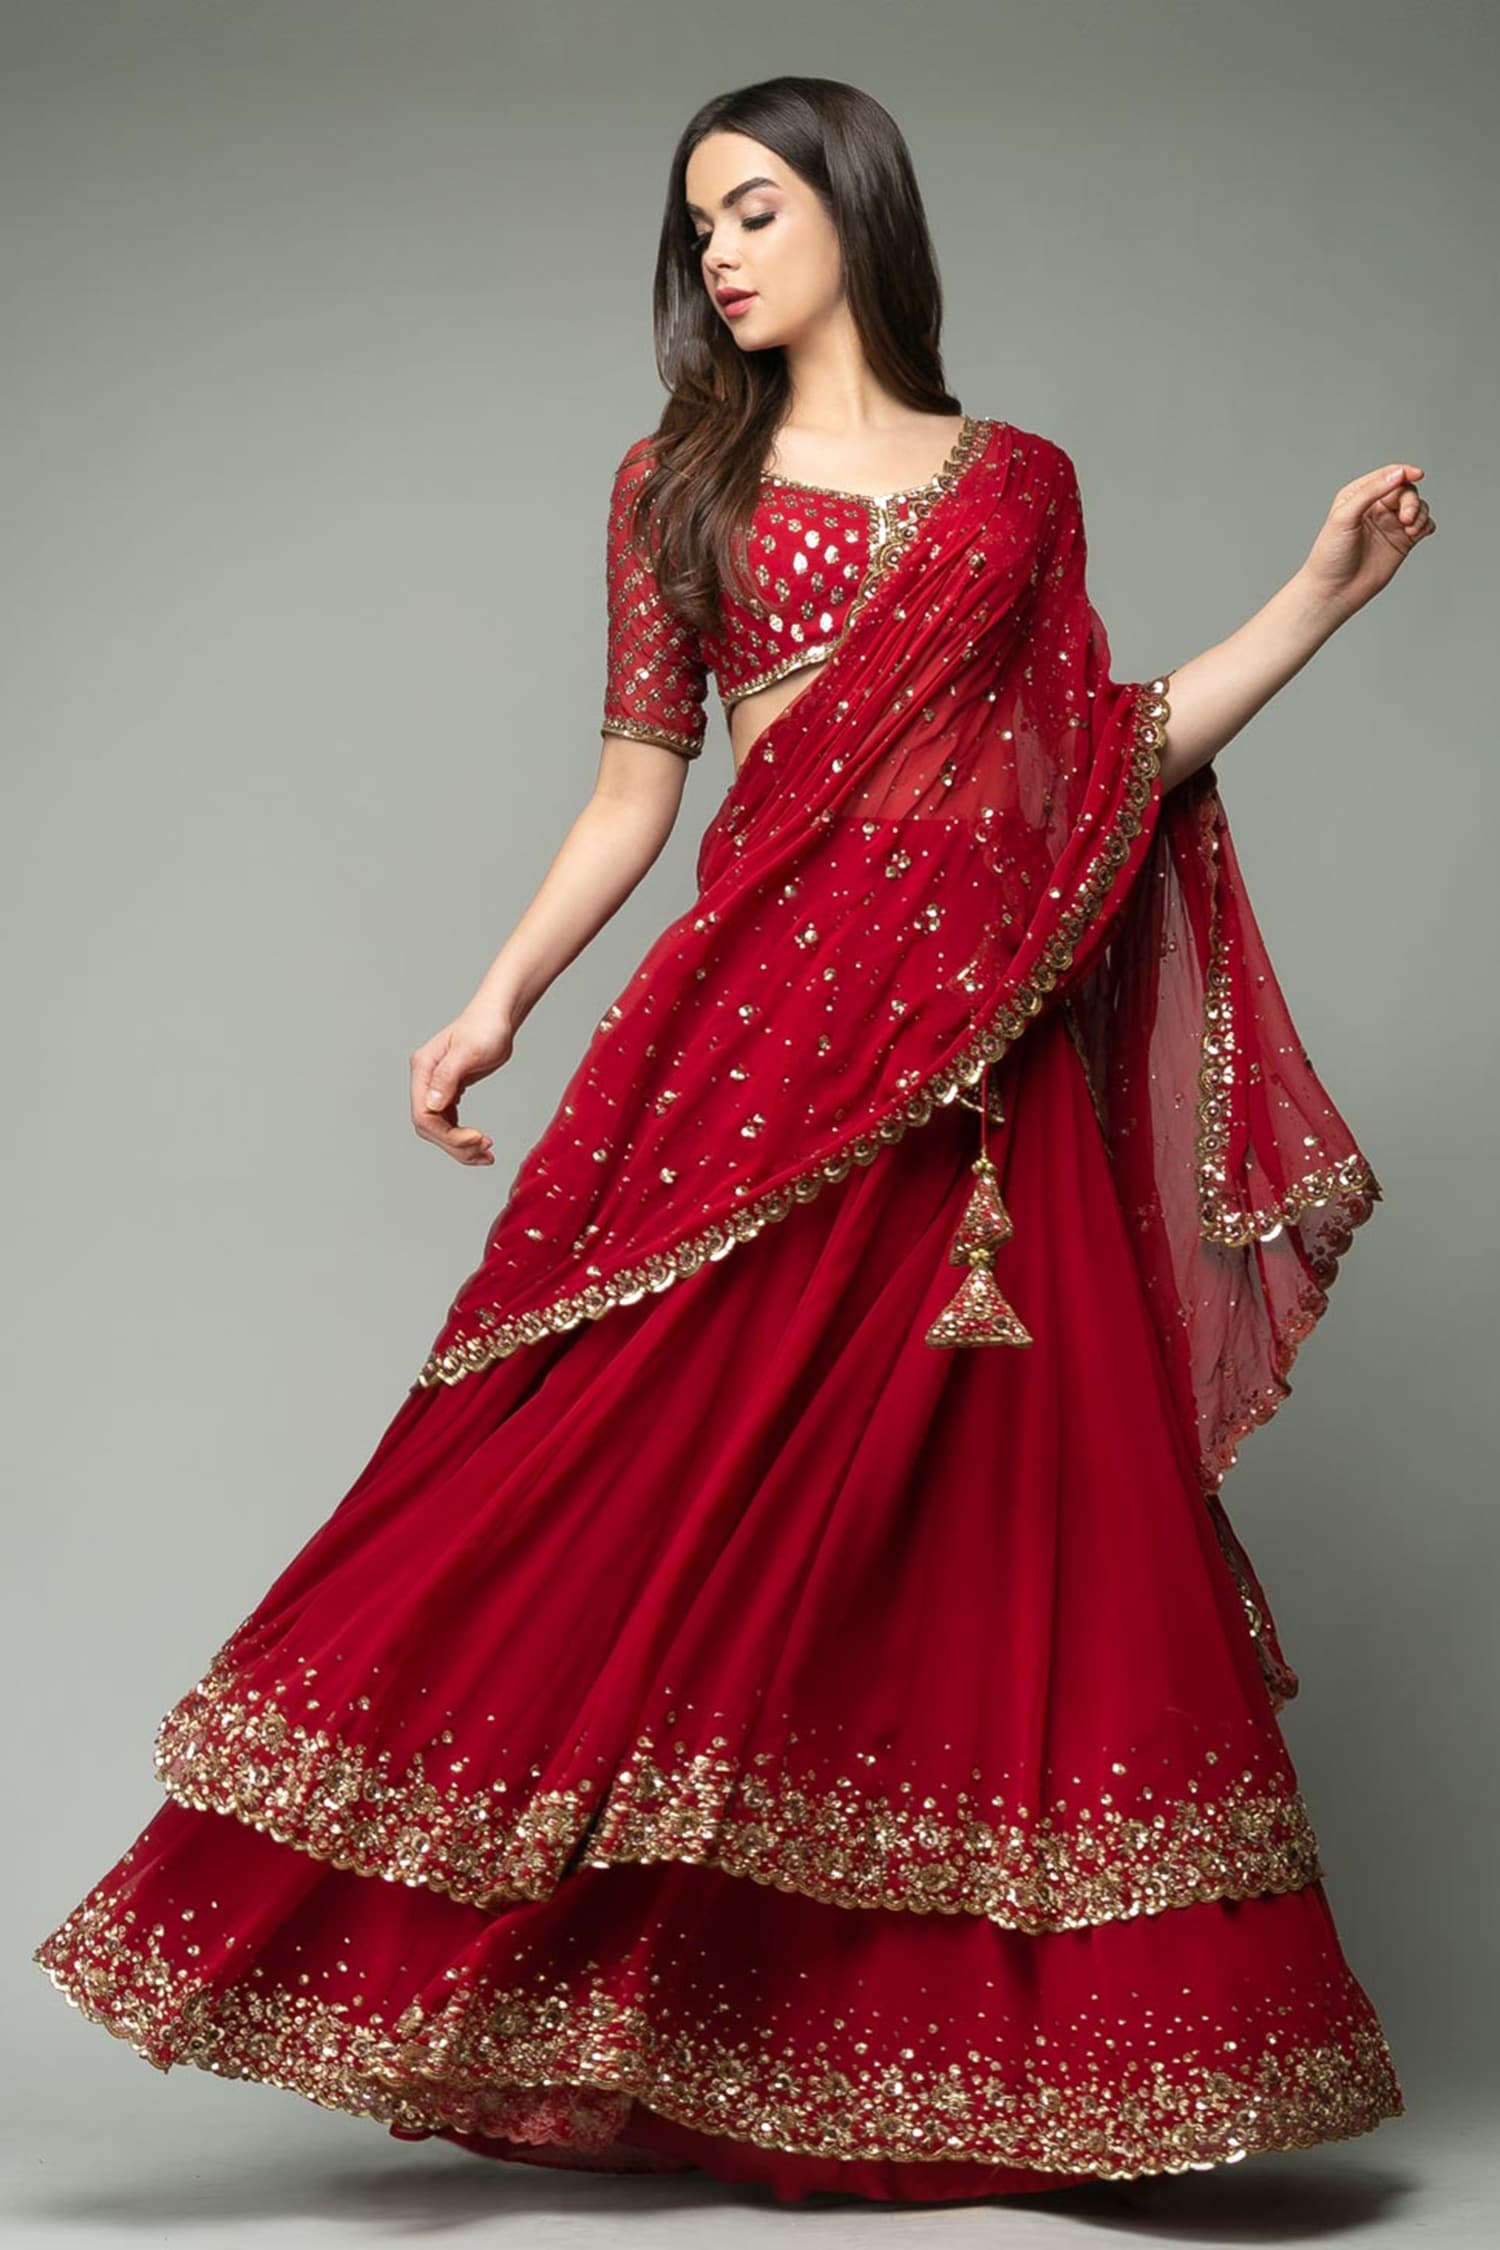 CHARMING Red Sequins Embroidered Art Silk Semi Stitched bridal lehenga with  double dupatta - MEGHALYA - 3053207